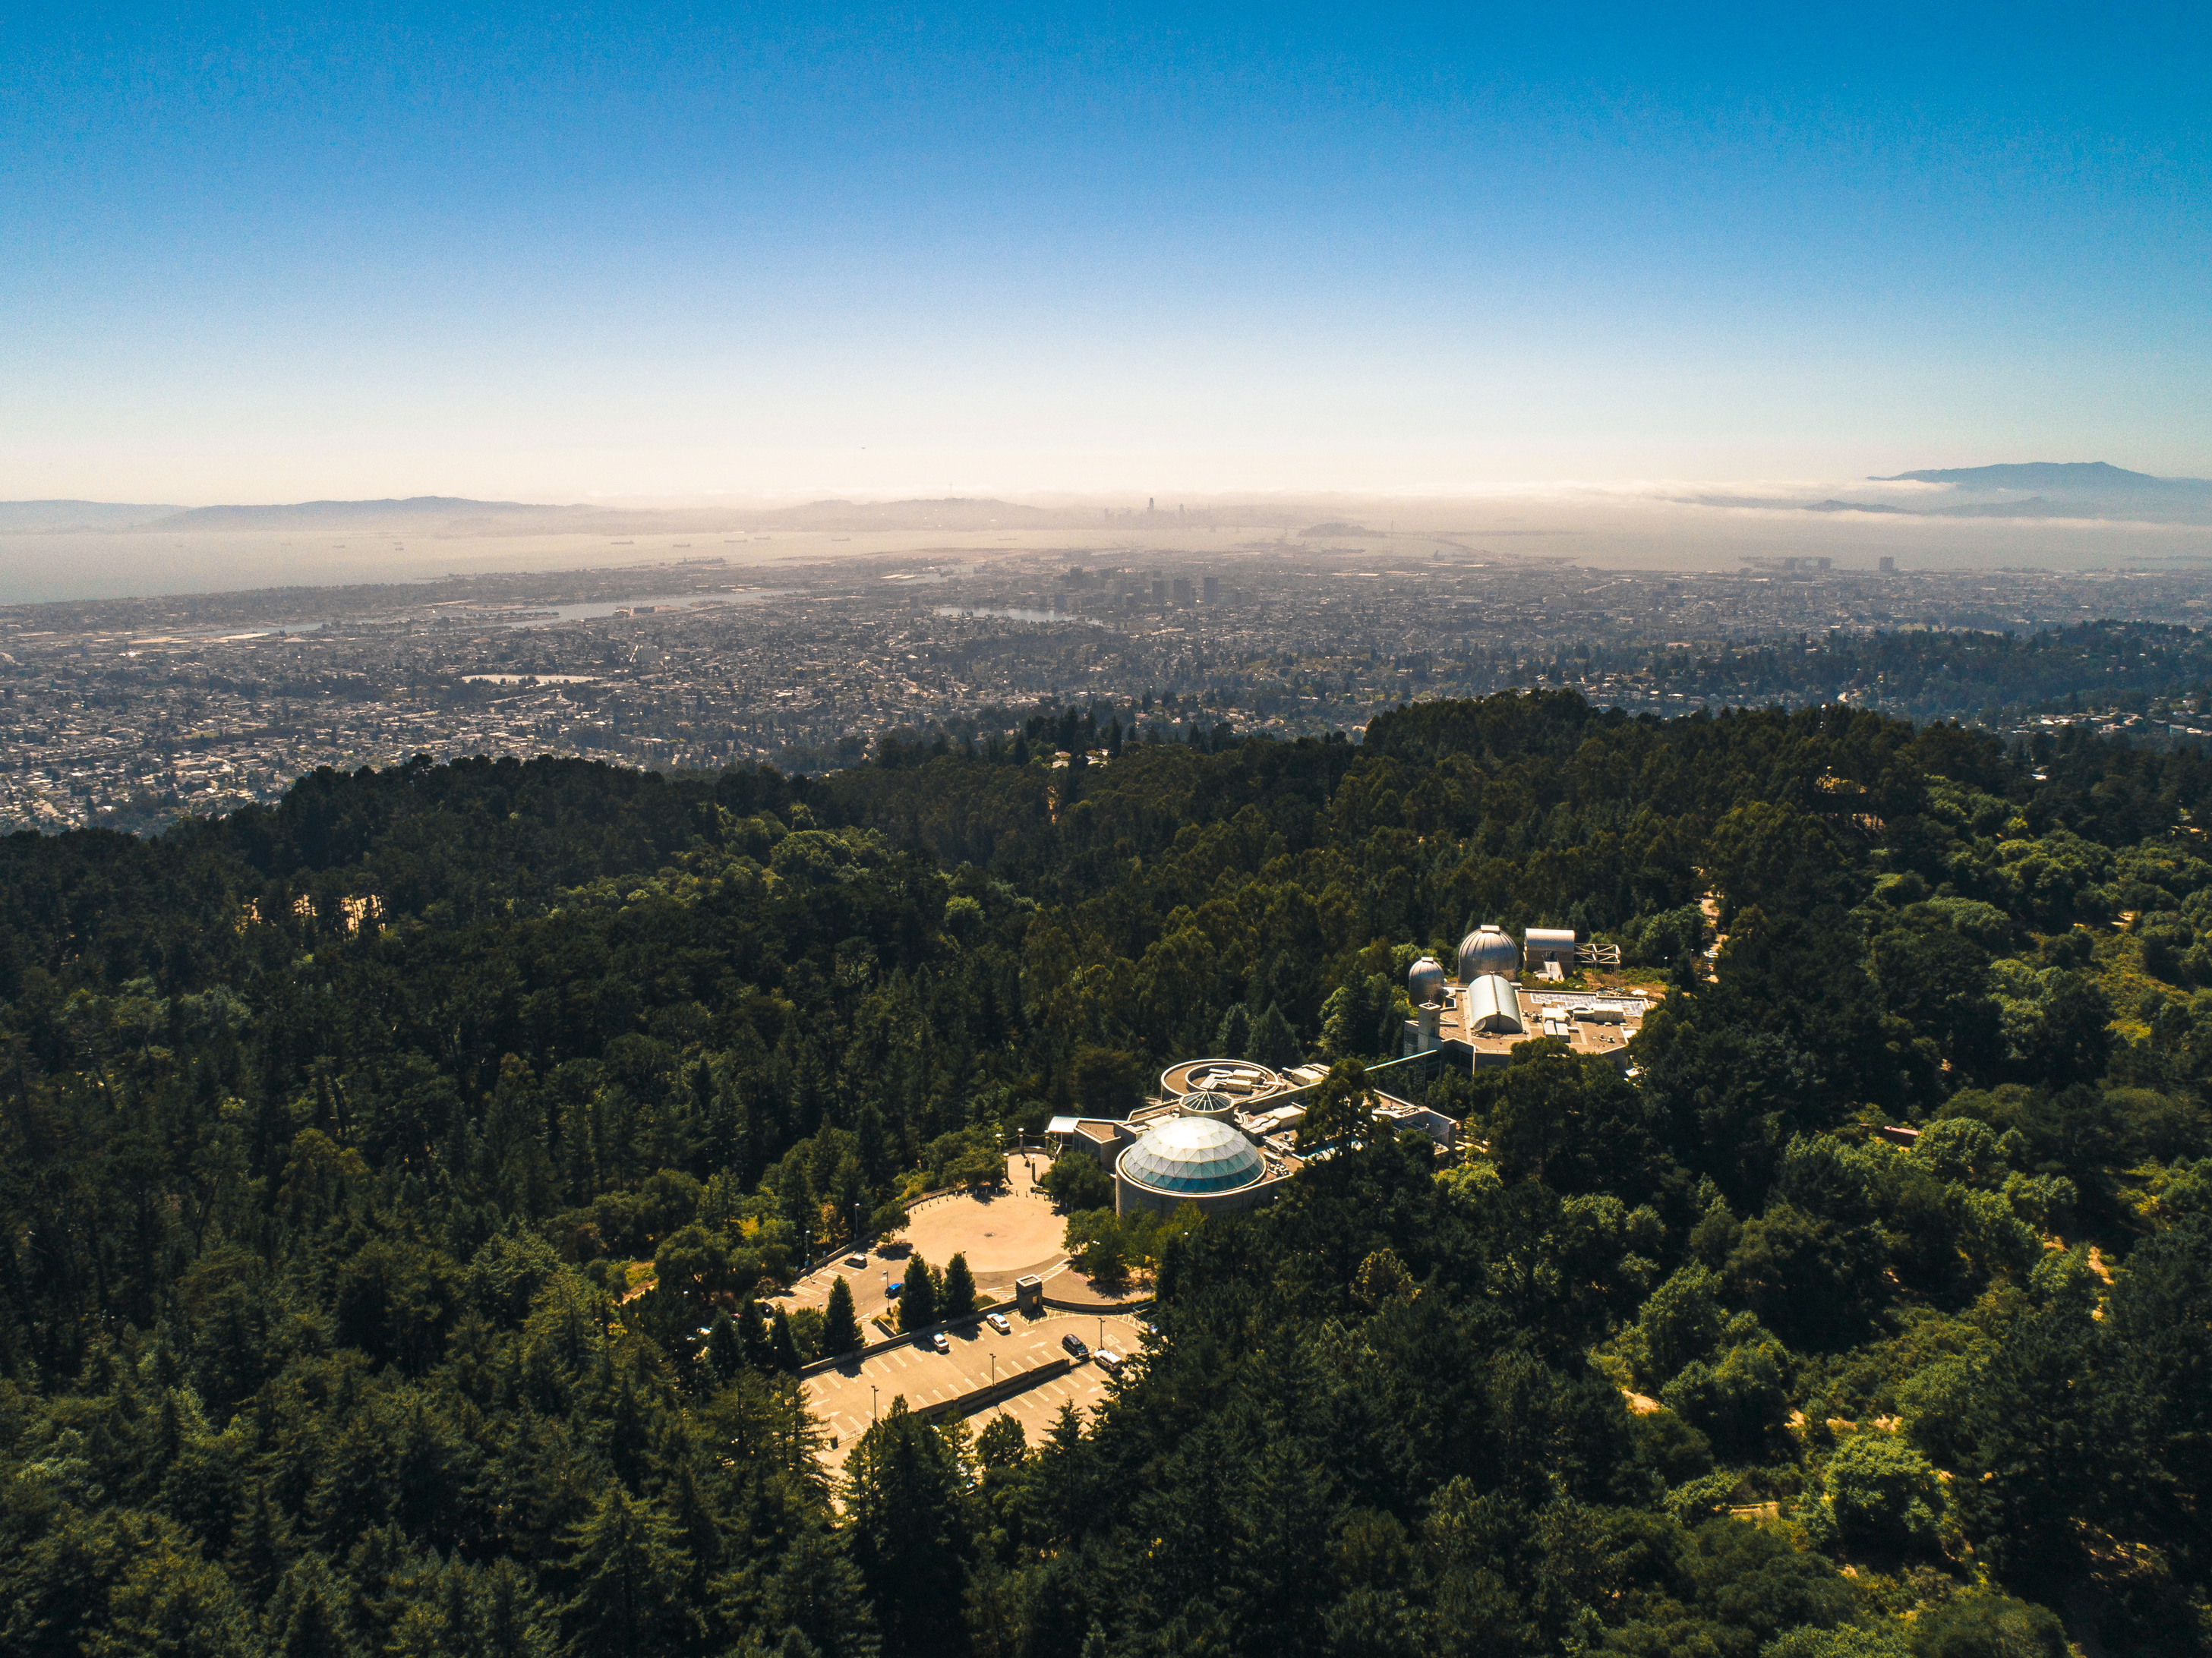 Aerial view of the Chabot Space & Science Center